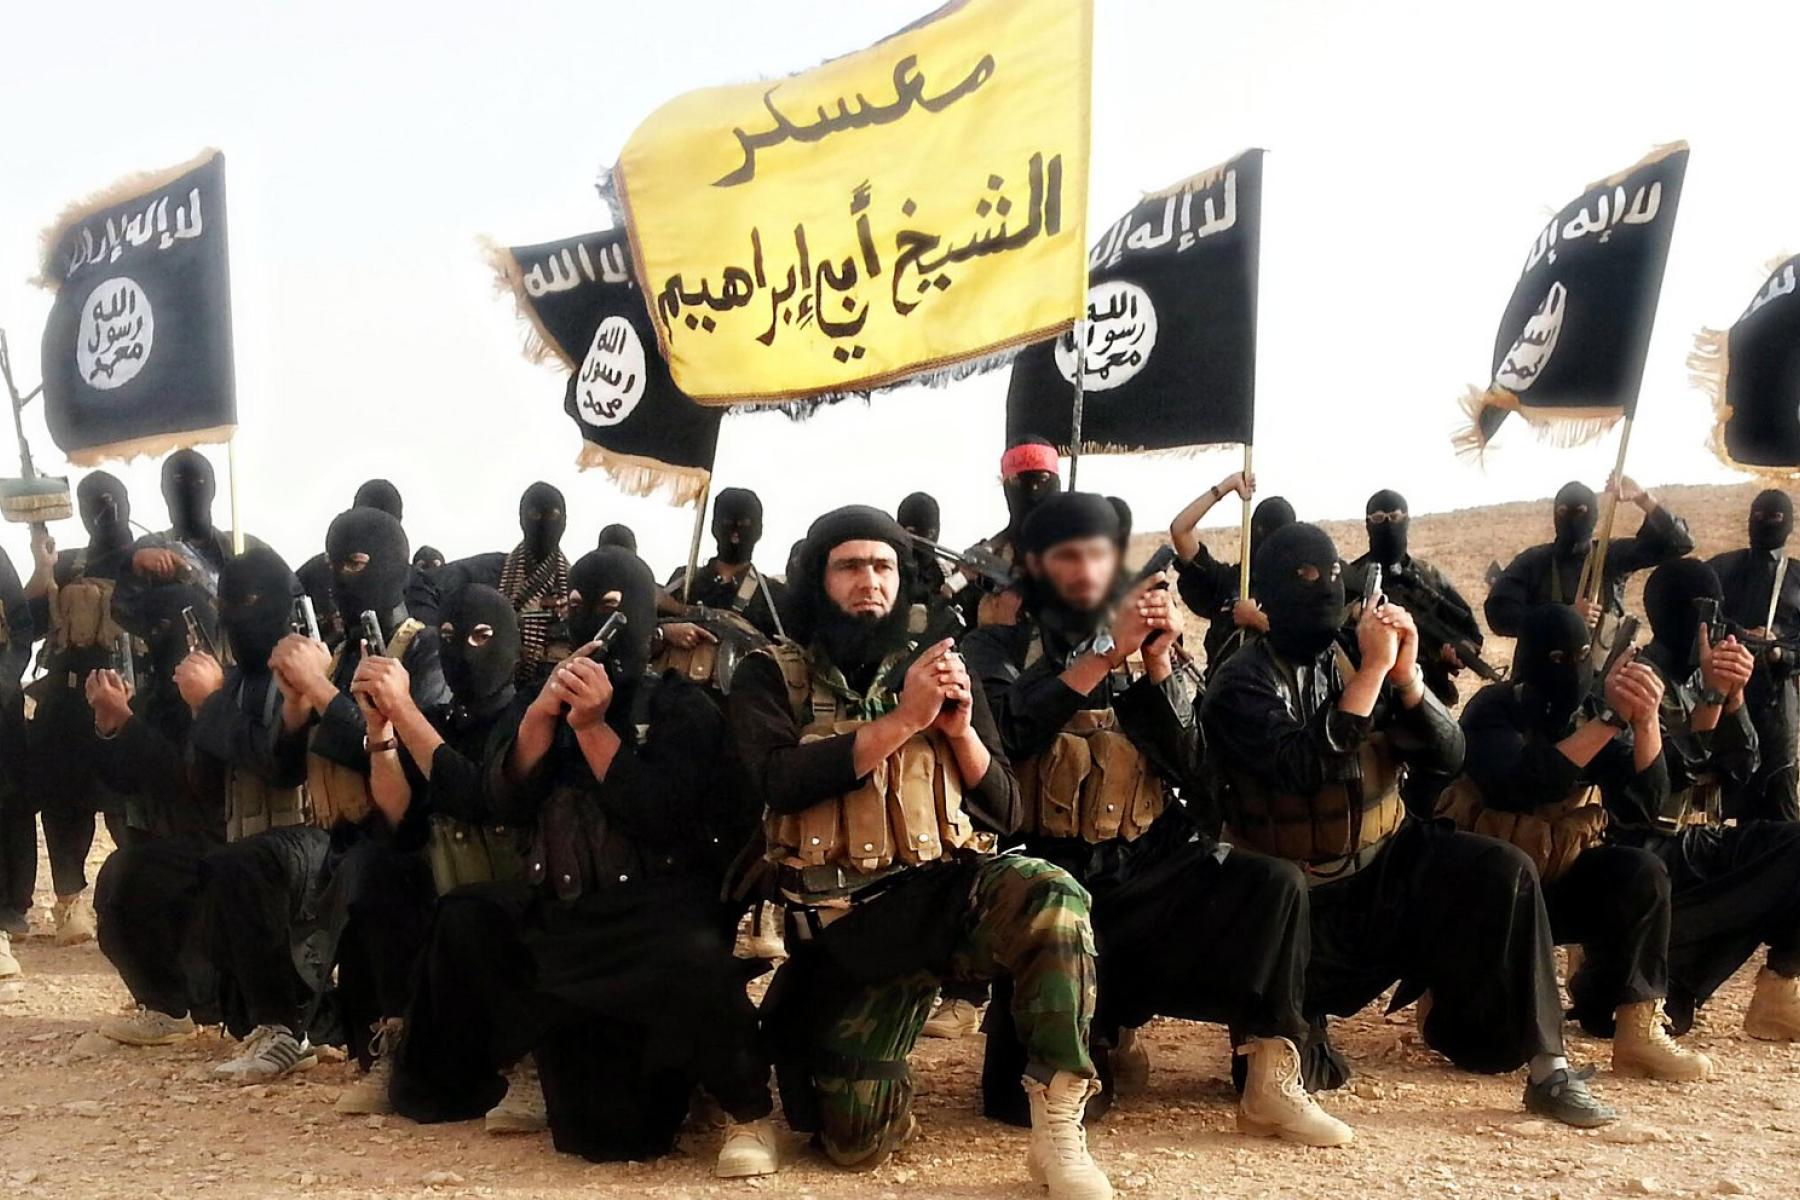 Islamic State of Iraq and the Levant fighters pose in a propaganda photo released by the organization